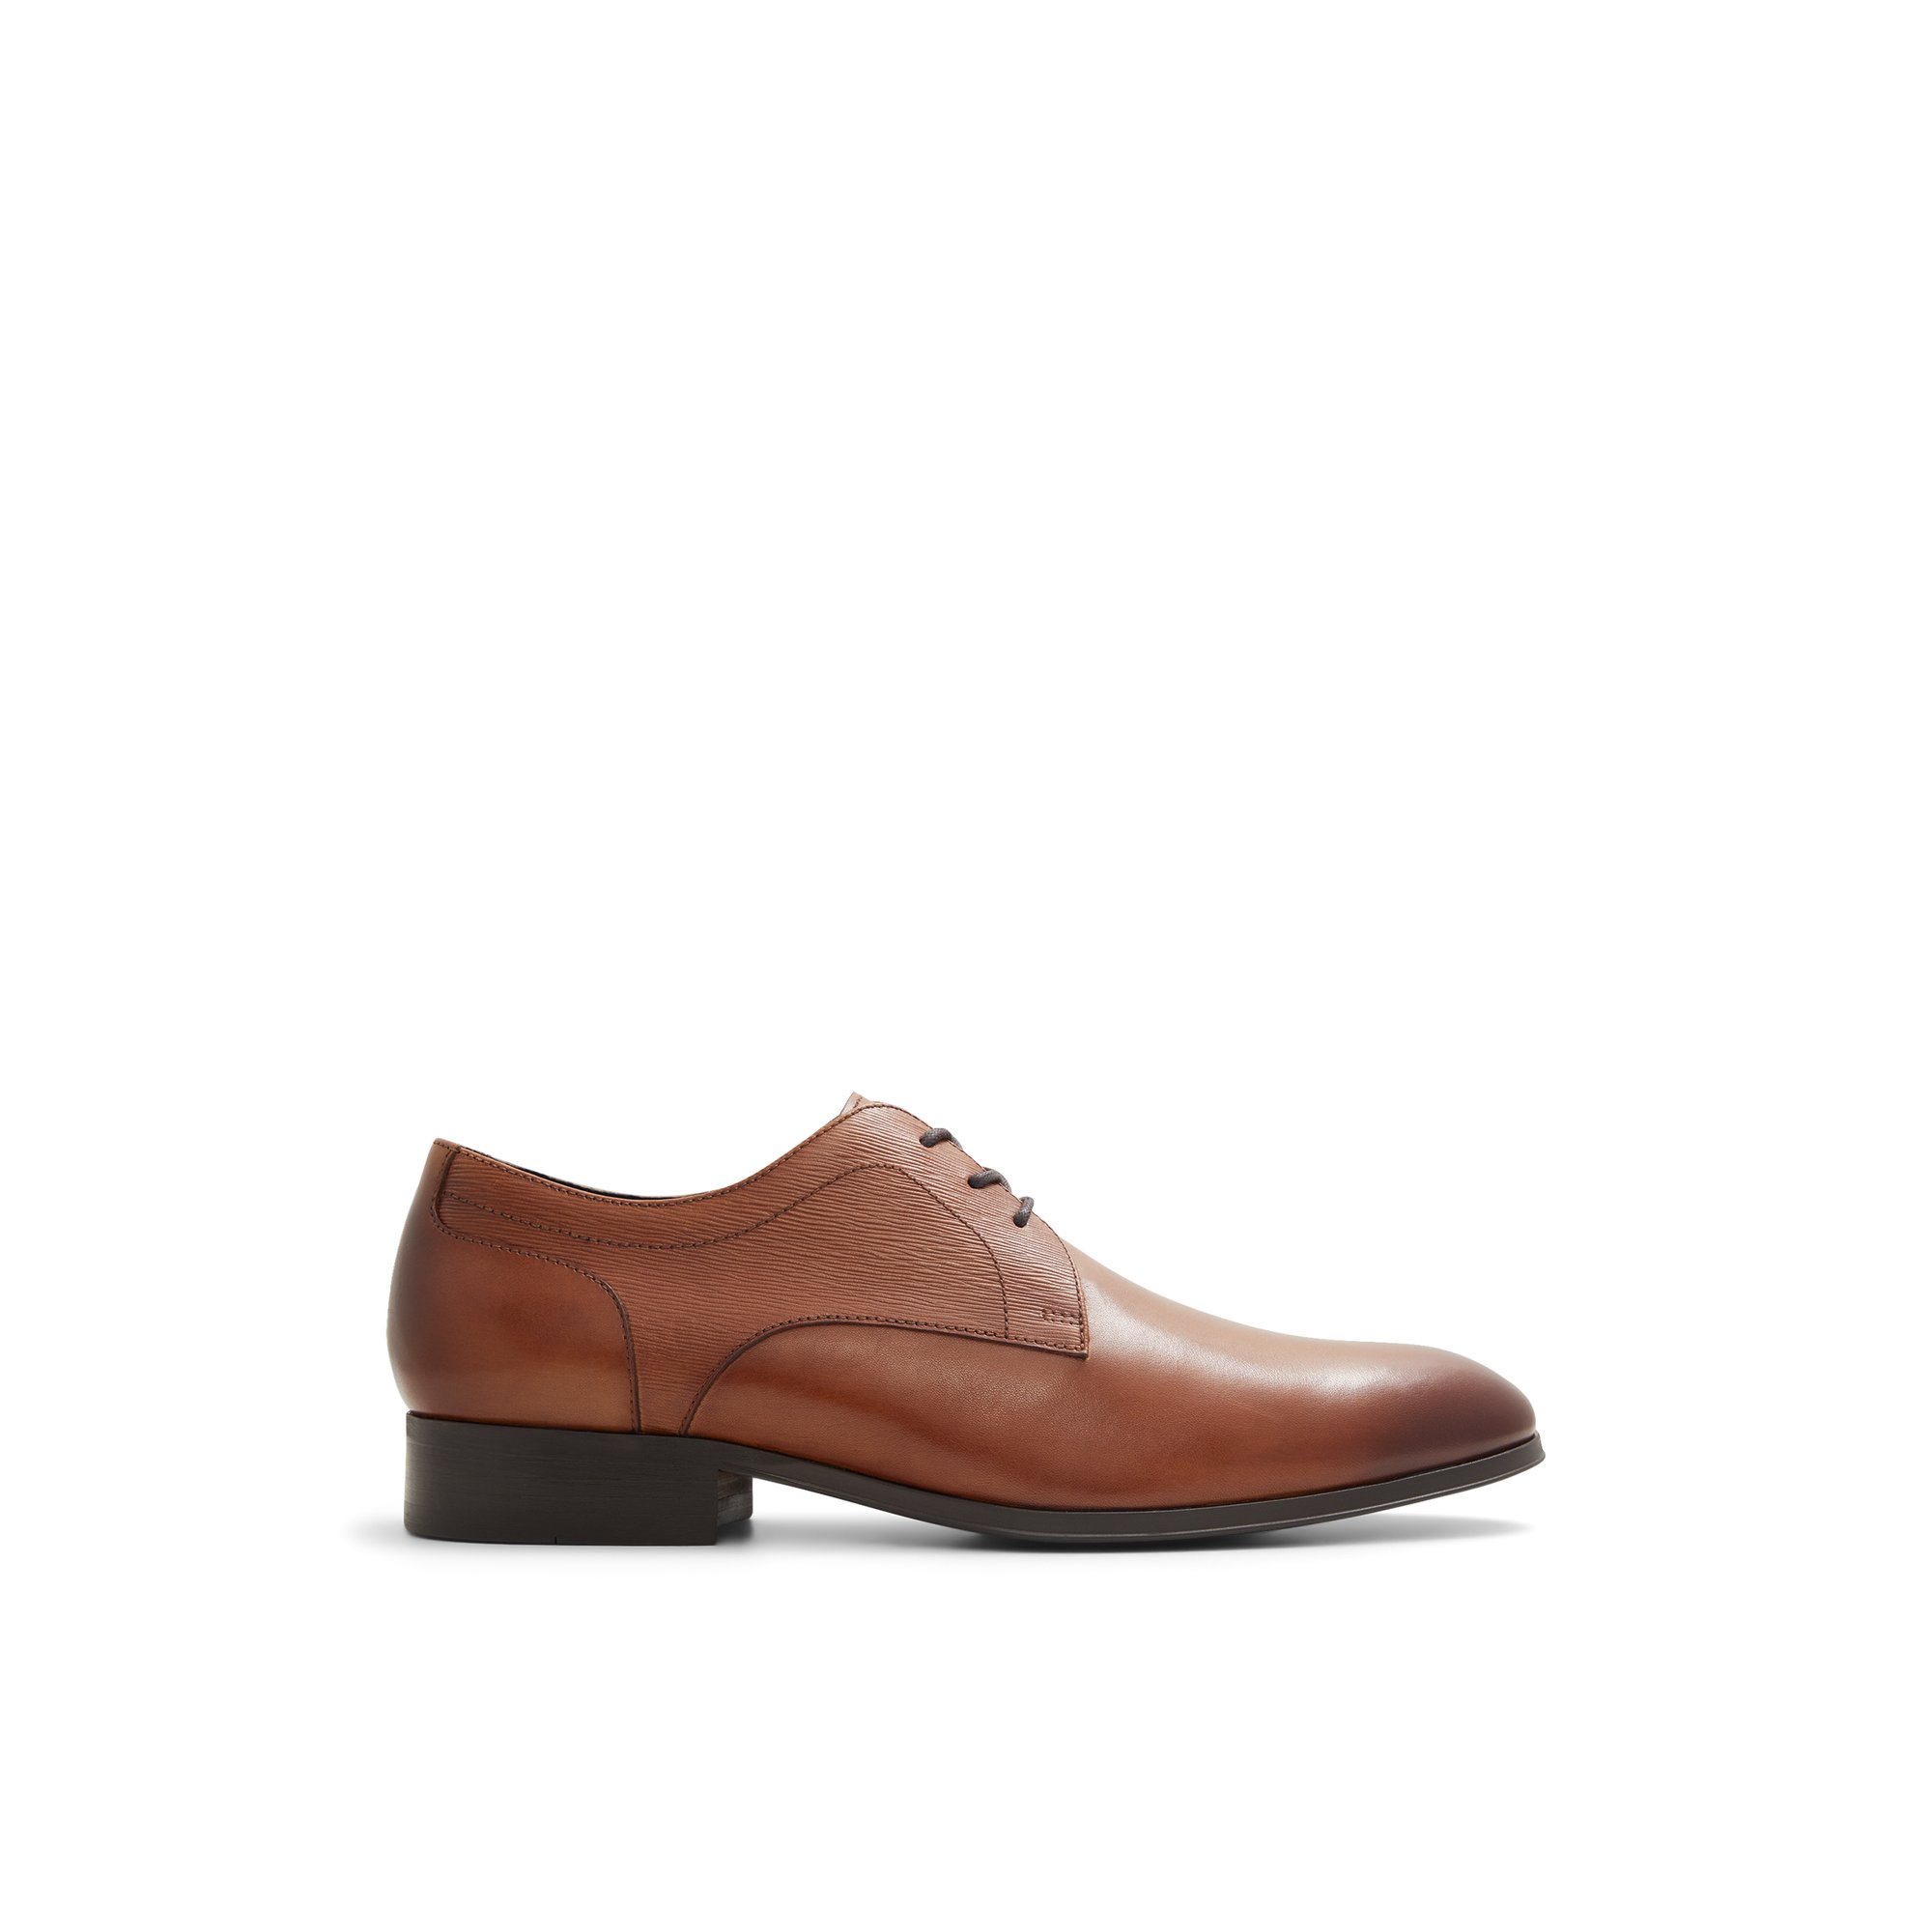 ALDO Kingsley - Men's Oxfords and Lace Ups - Brown